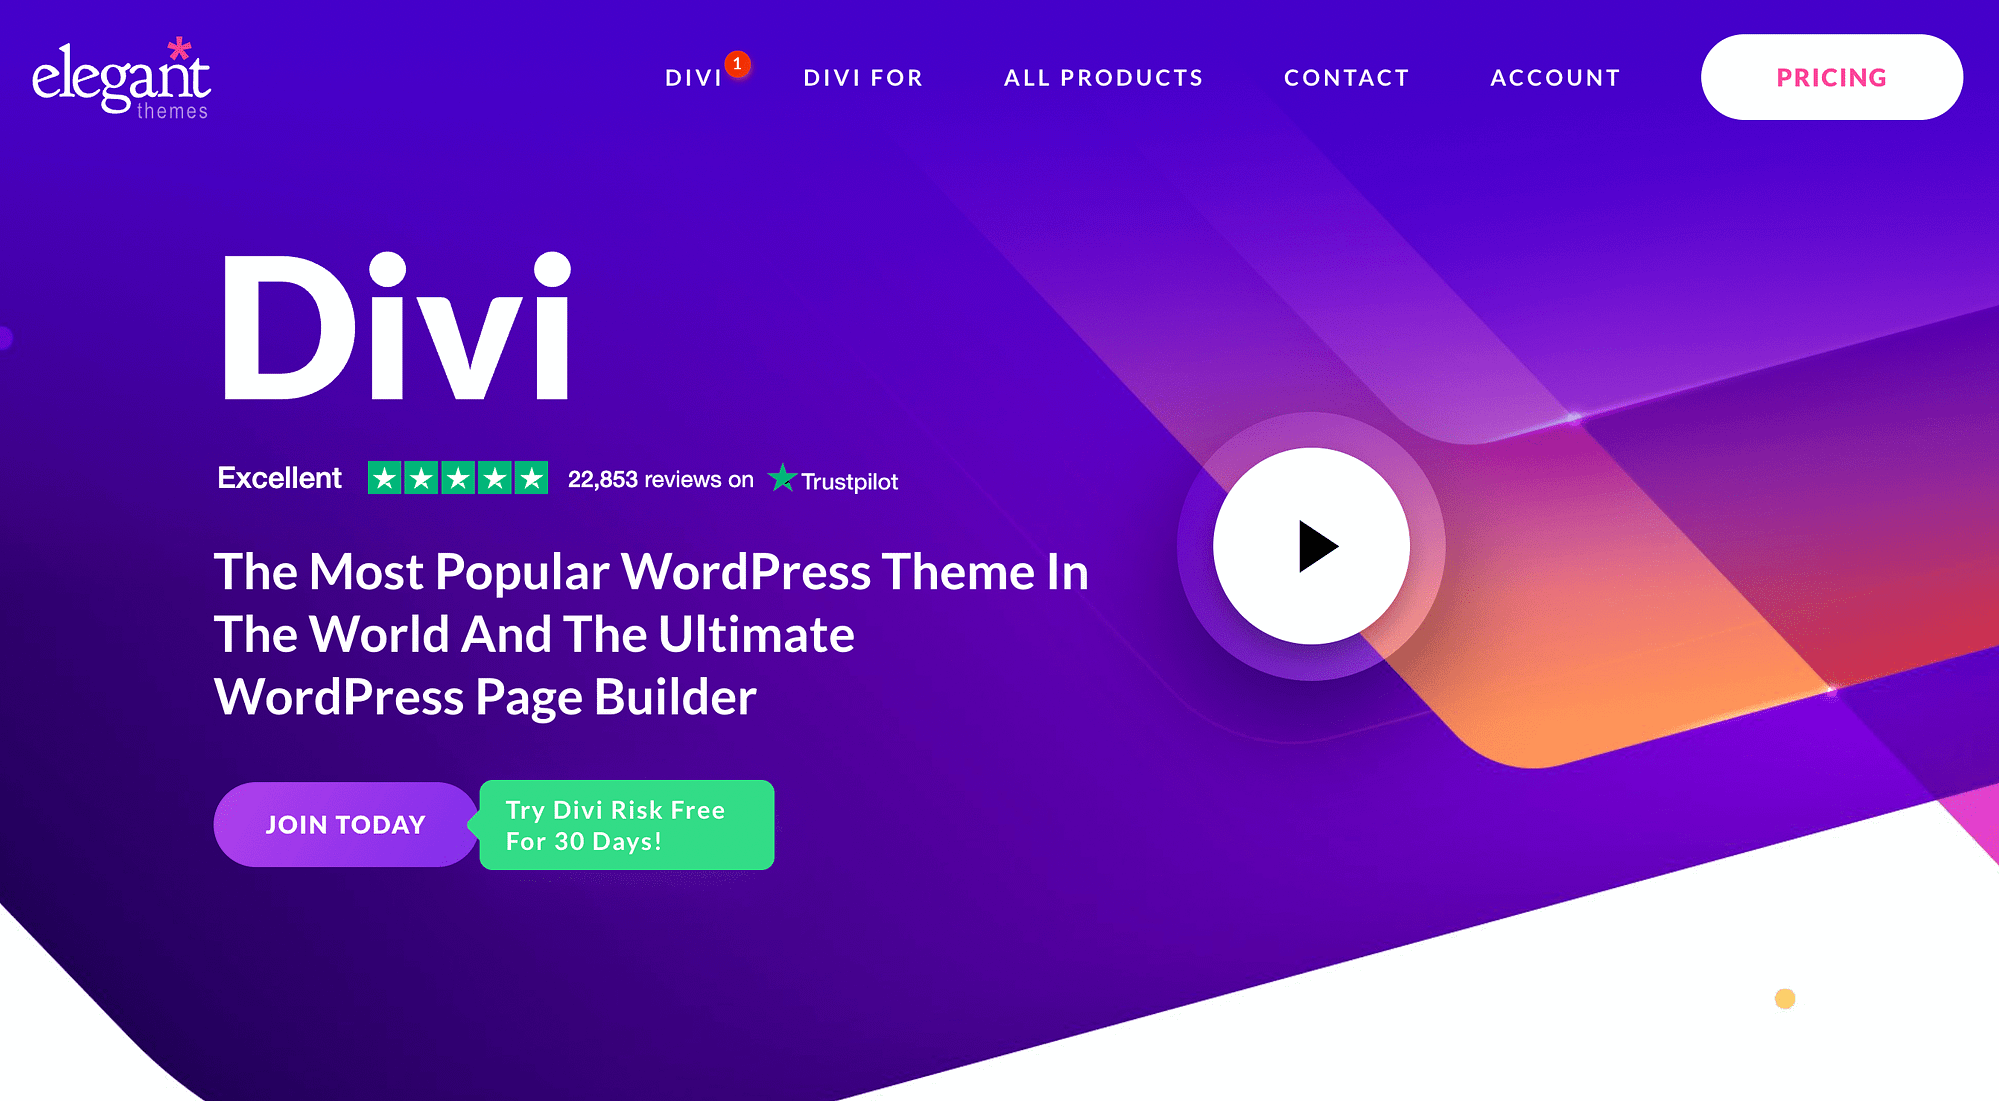 The Divi theme and page builder.